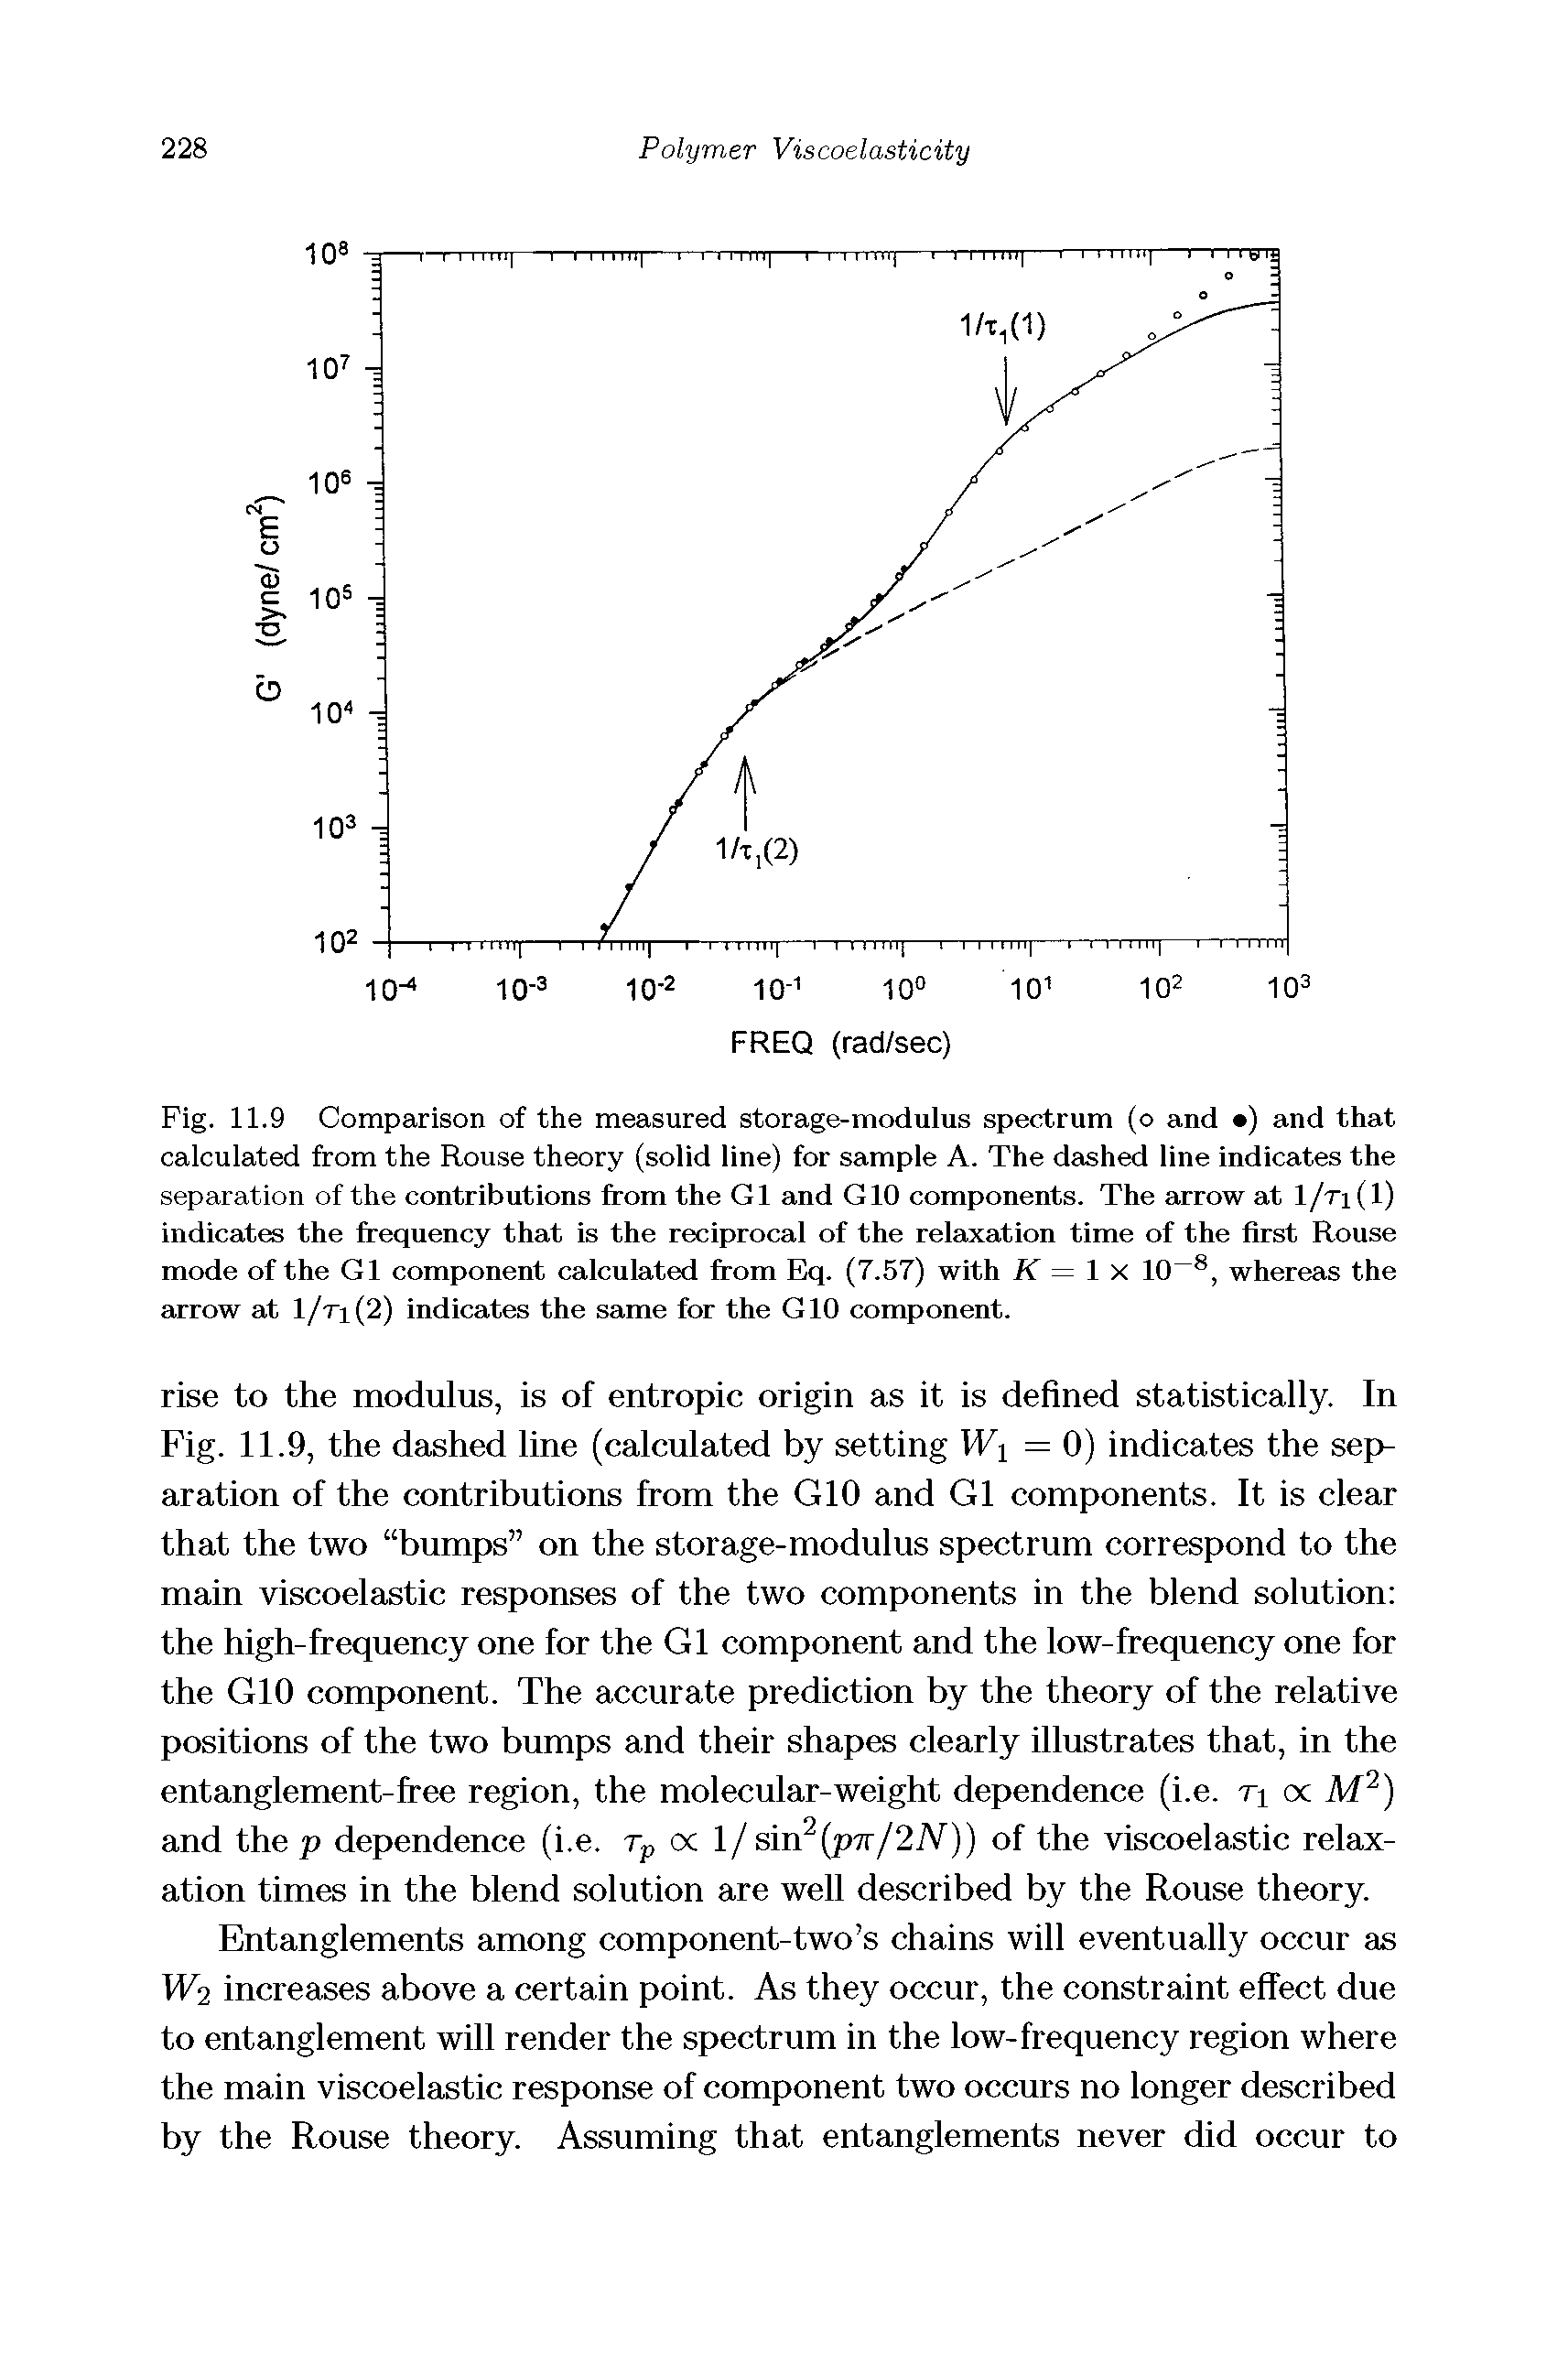 Fig. 11.9 Comparison of the measured storage-modulus spectrum (o and ) and that calculated from the Rouse theory (solid line) for sample A. The dashed line indicates the separation of the contributions from the G1 and GIO components. The arrow at 1/ti(1) indicates the frequency that is the reciprocal of the relaxation time of the first Rouse mode of the G1 component calculated from Eq. (7.57) with K = x 10, wheresis the arrow at l/ri(2) indicates the same for the GIO component.